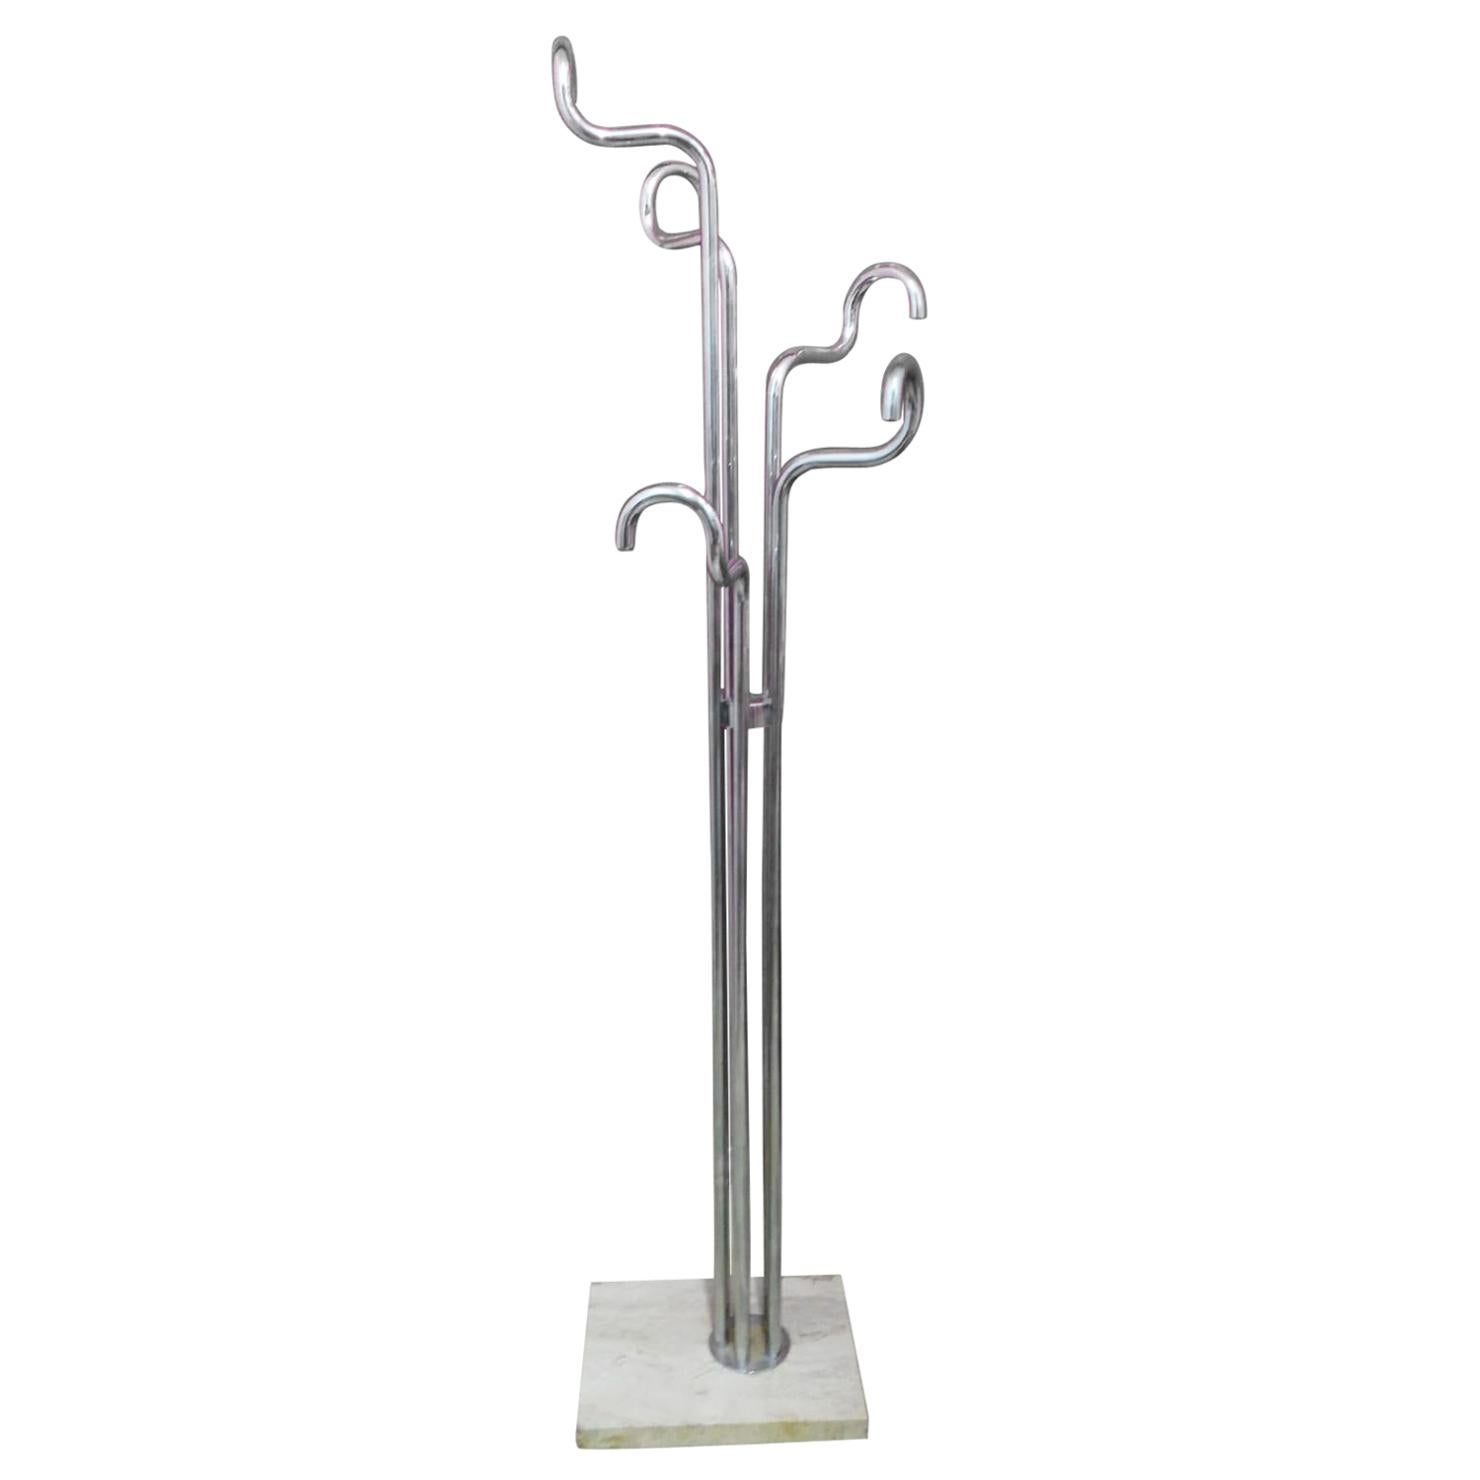 Coat Hanger Made of Steel and Marble Base, Italian Style, 1960s